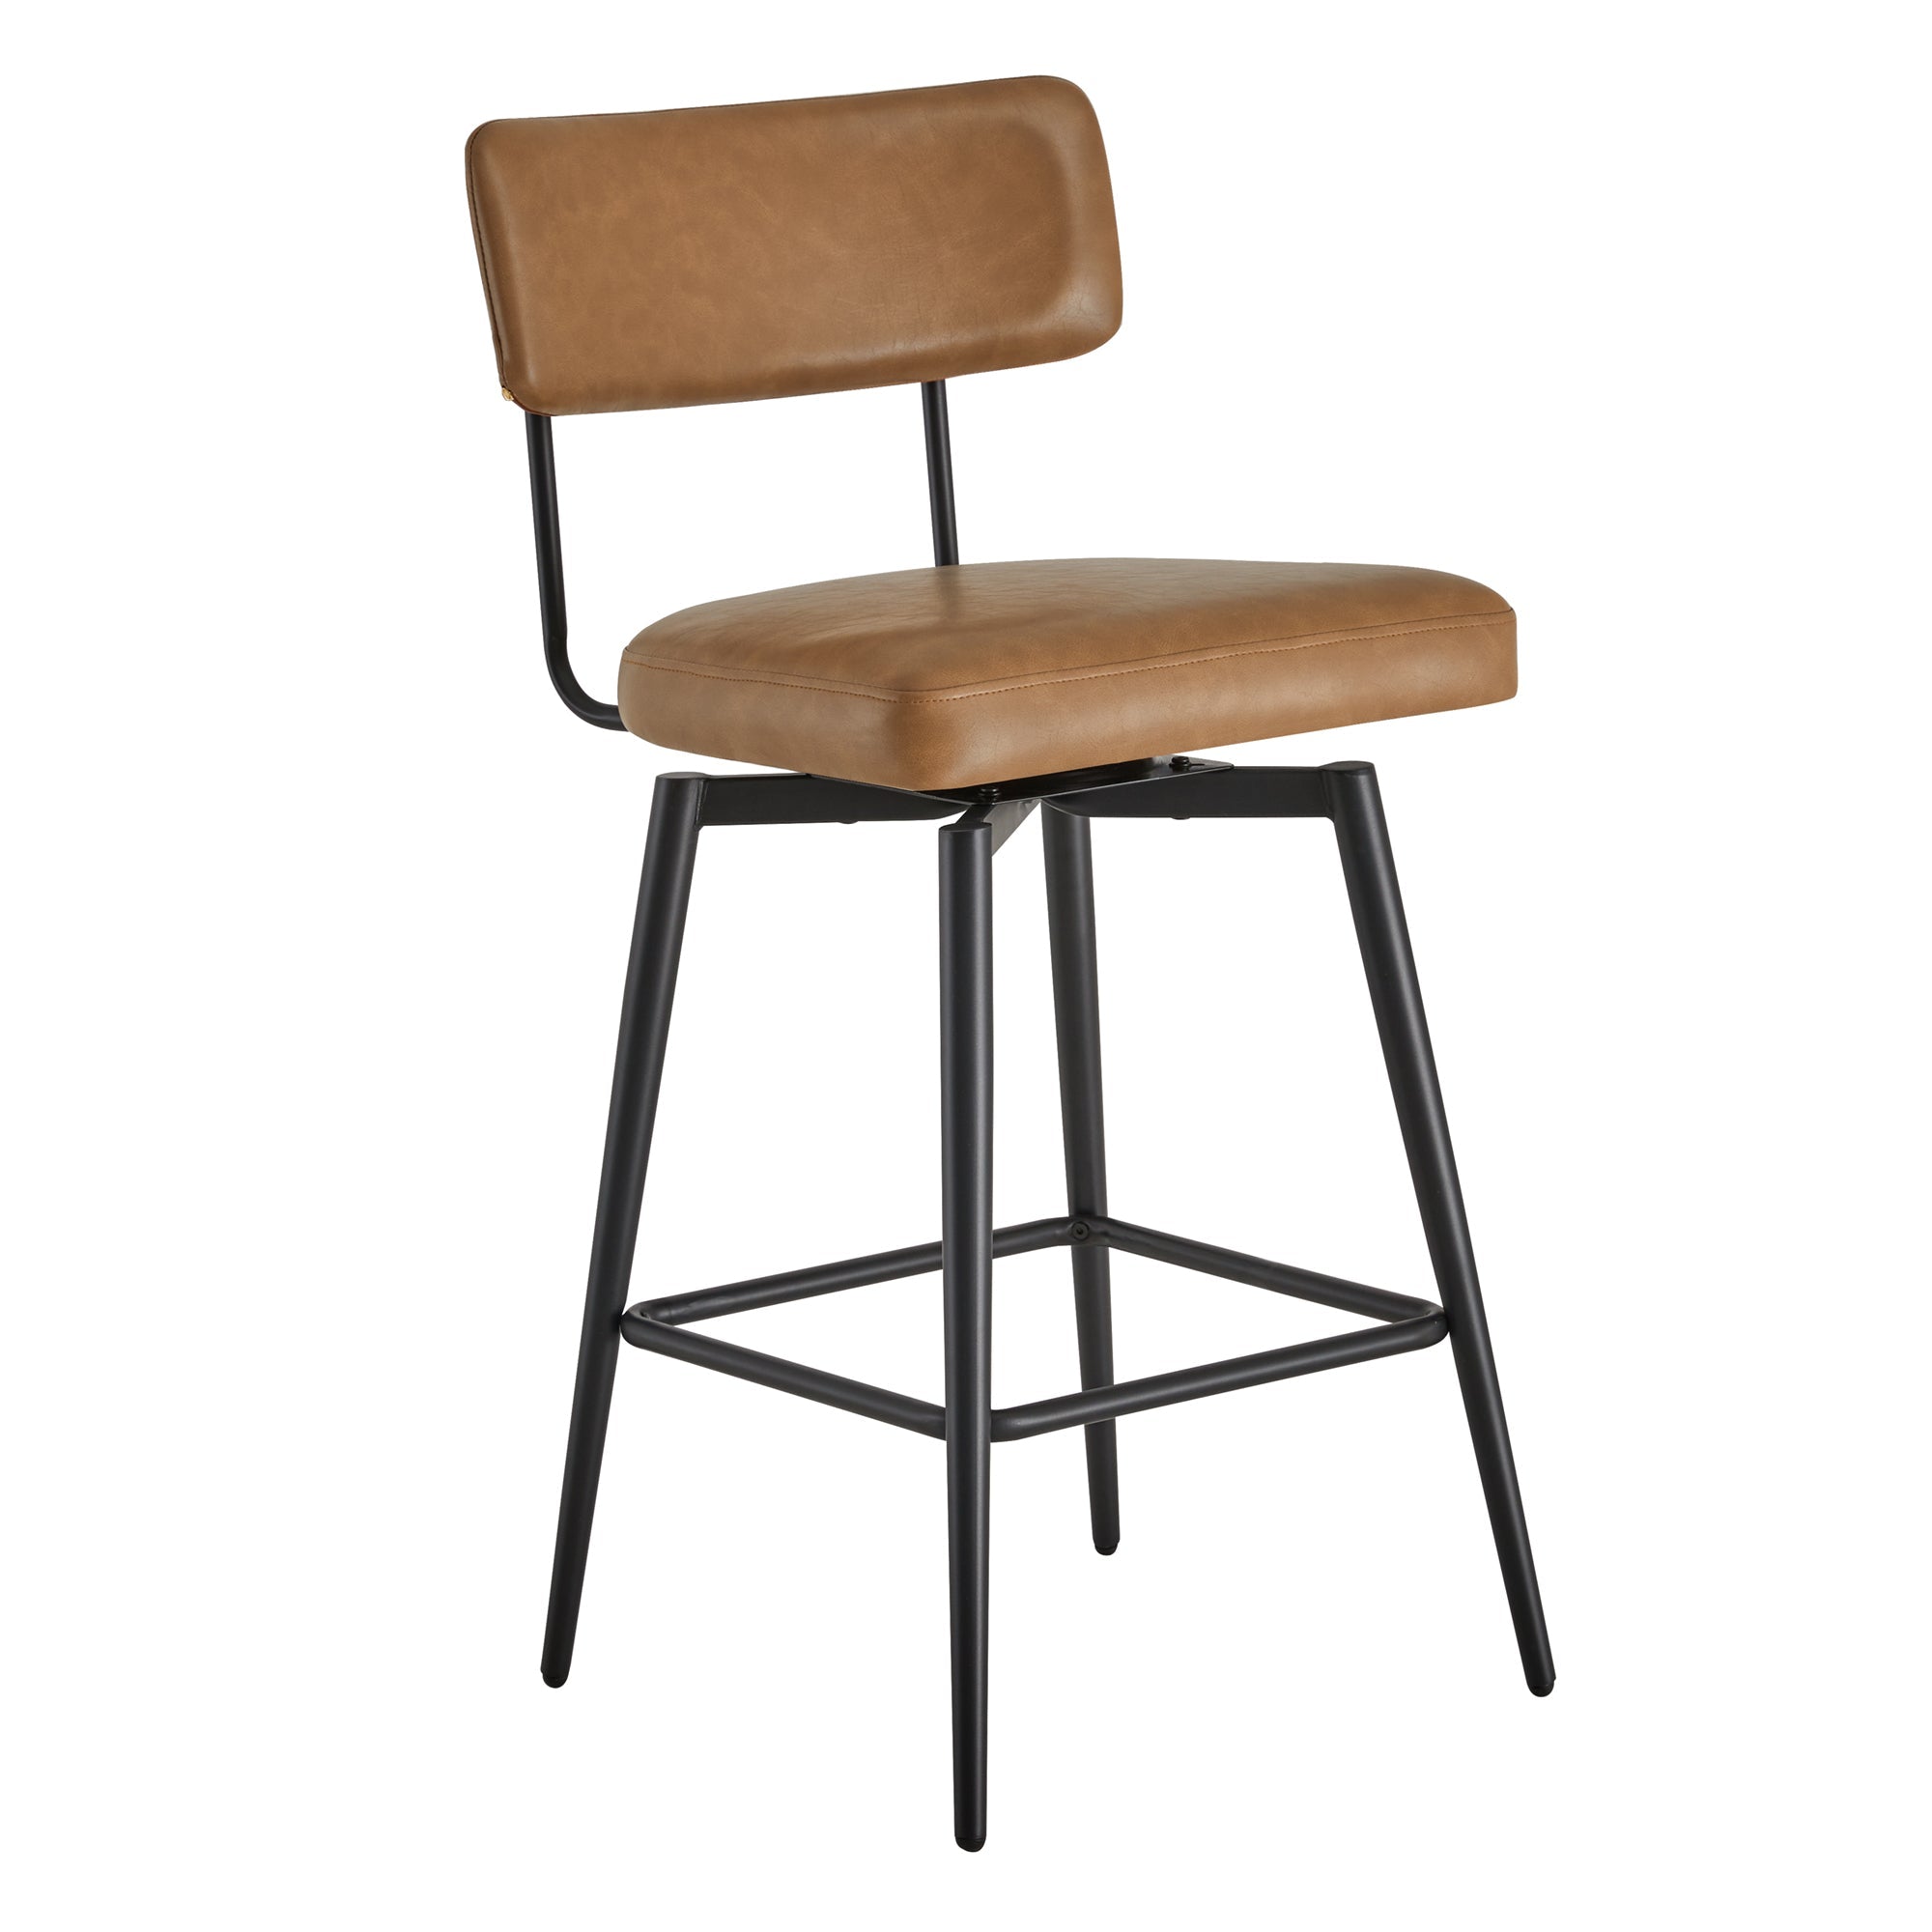 CHITA LIVING-Lovy Swivel Counter Stools (Set of 2）-Counter Stools-Faux Leather-Saddle Brown-